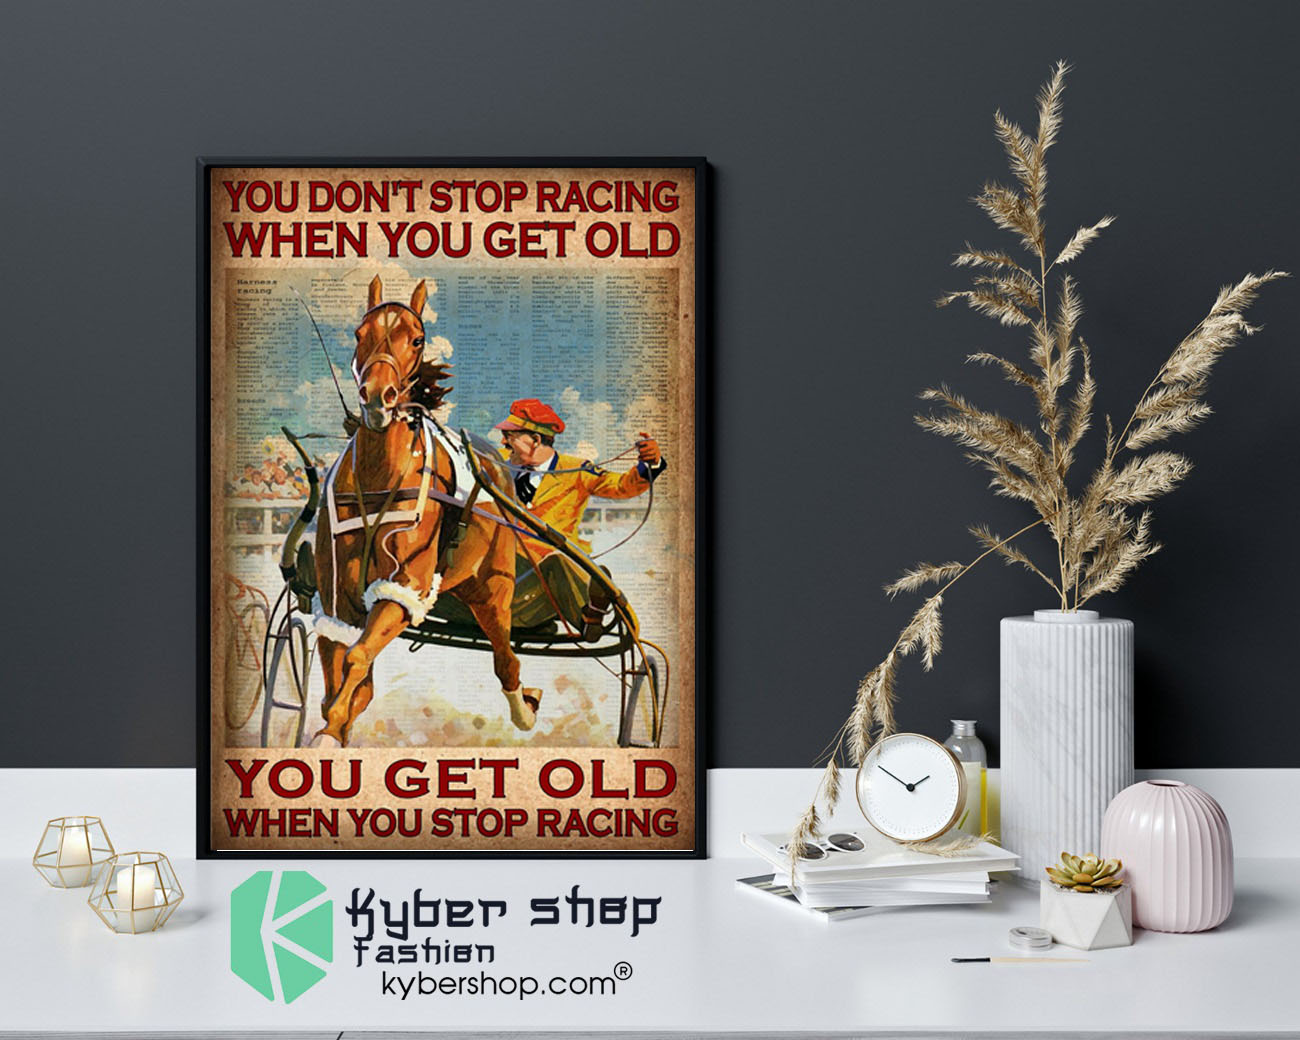 You don't stop racing when you get old poster9